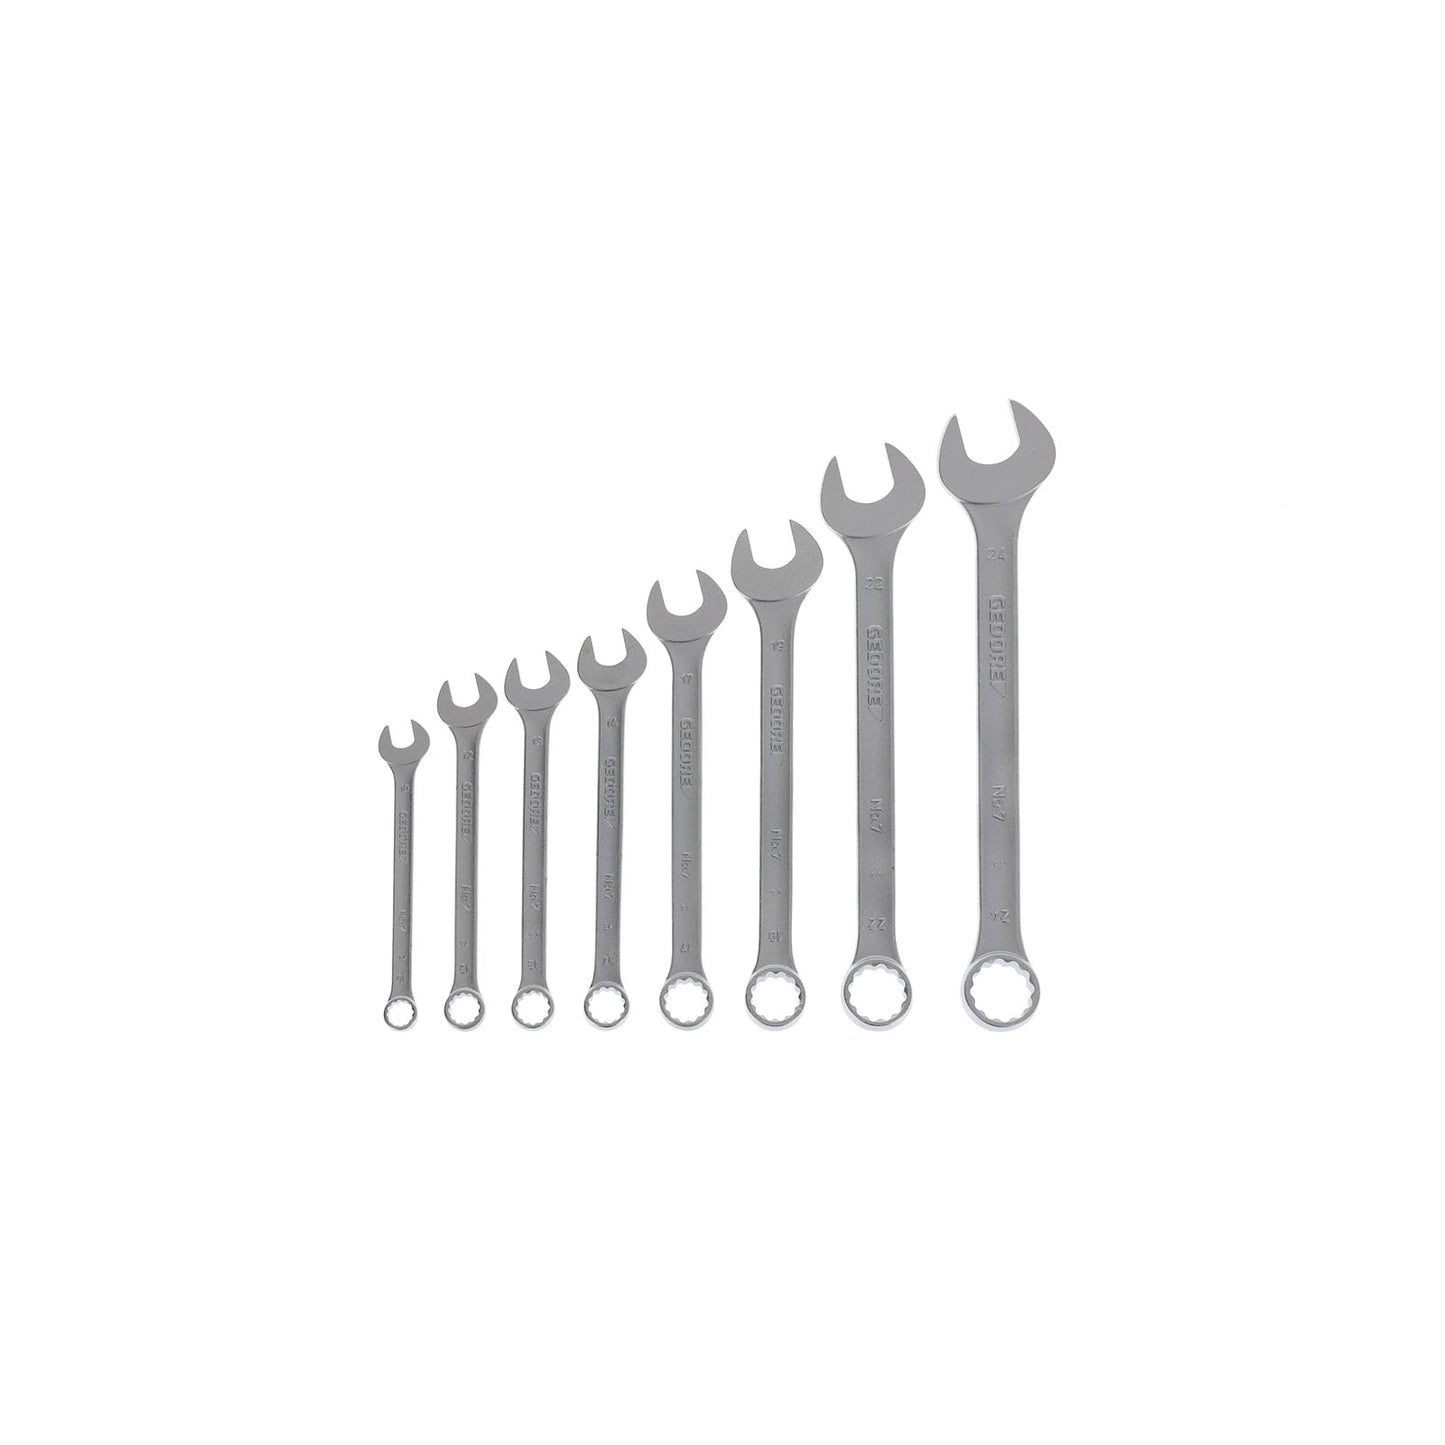 GEDORE 7-08 - Set of 8 Combination Wrenches (6092770)